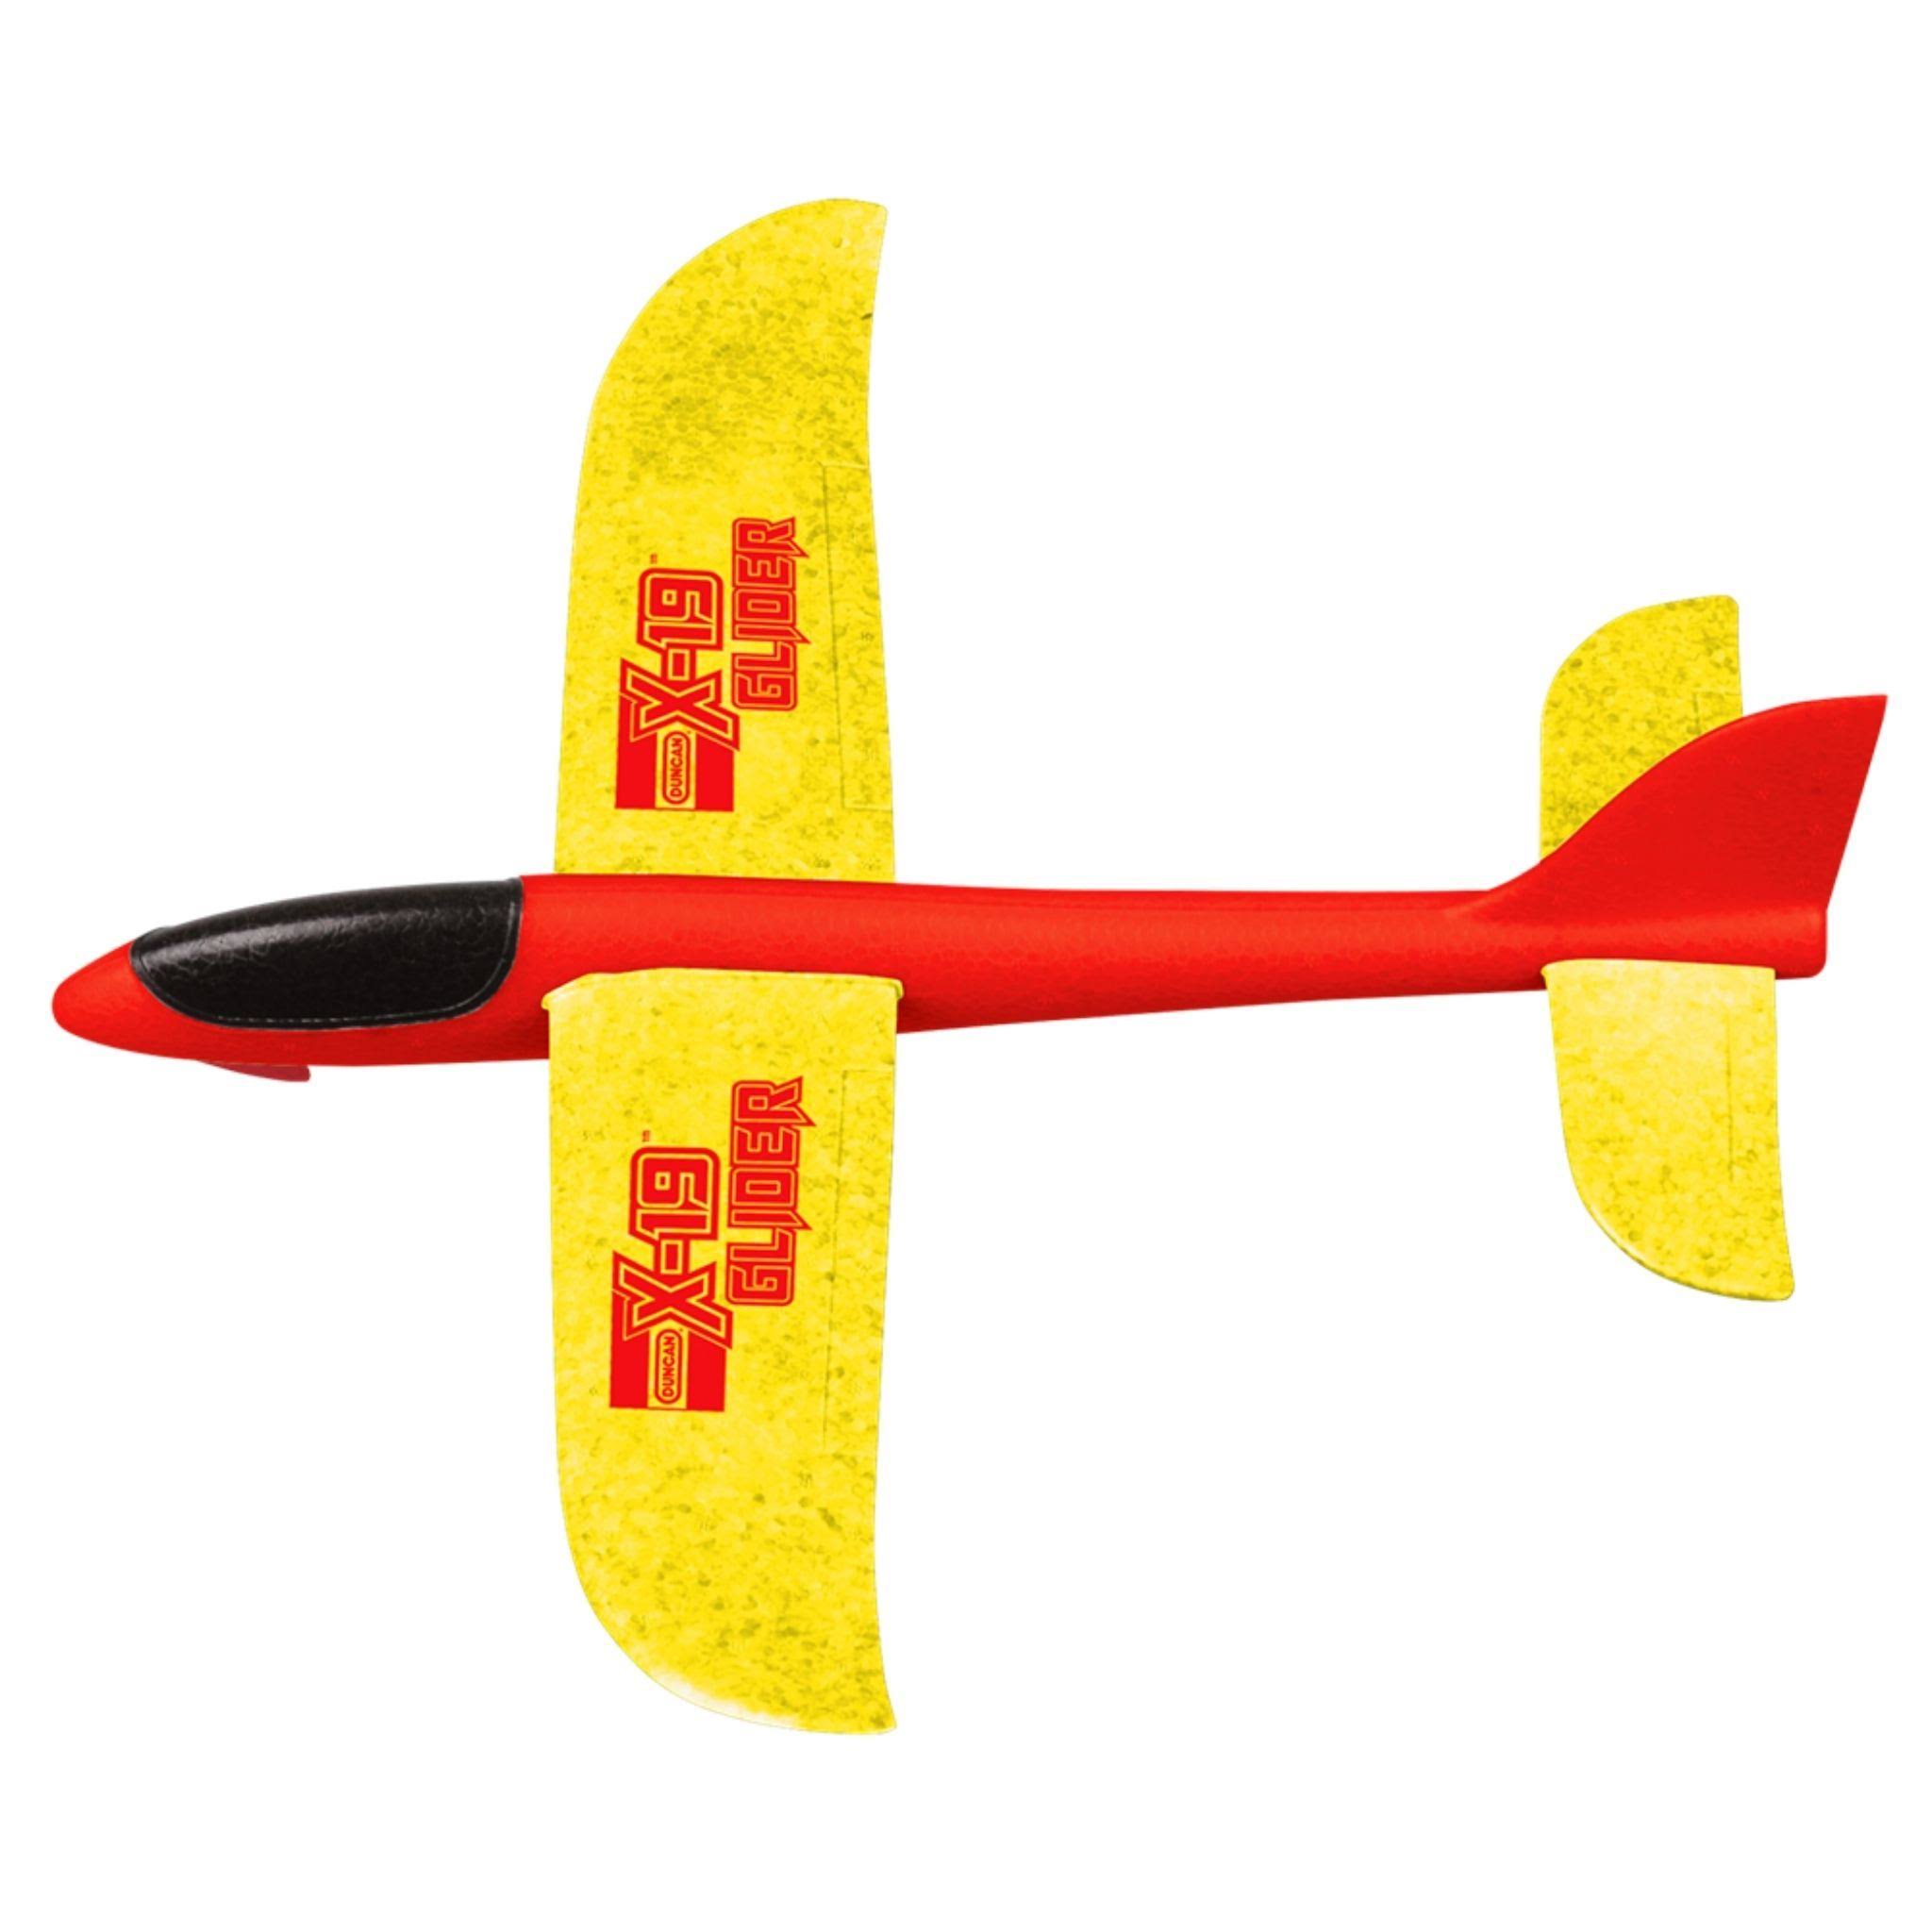 Duncan X019 Glider - With Hand Launcher